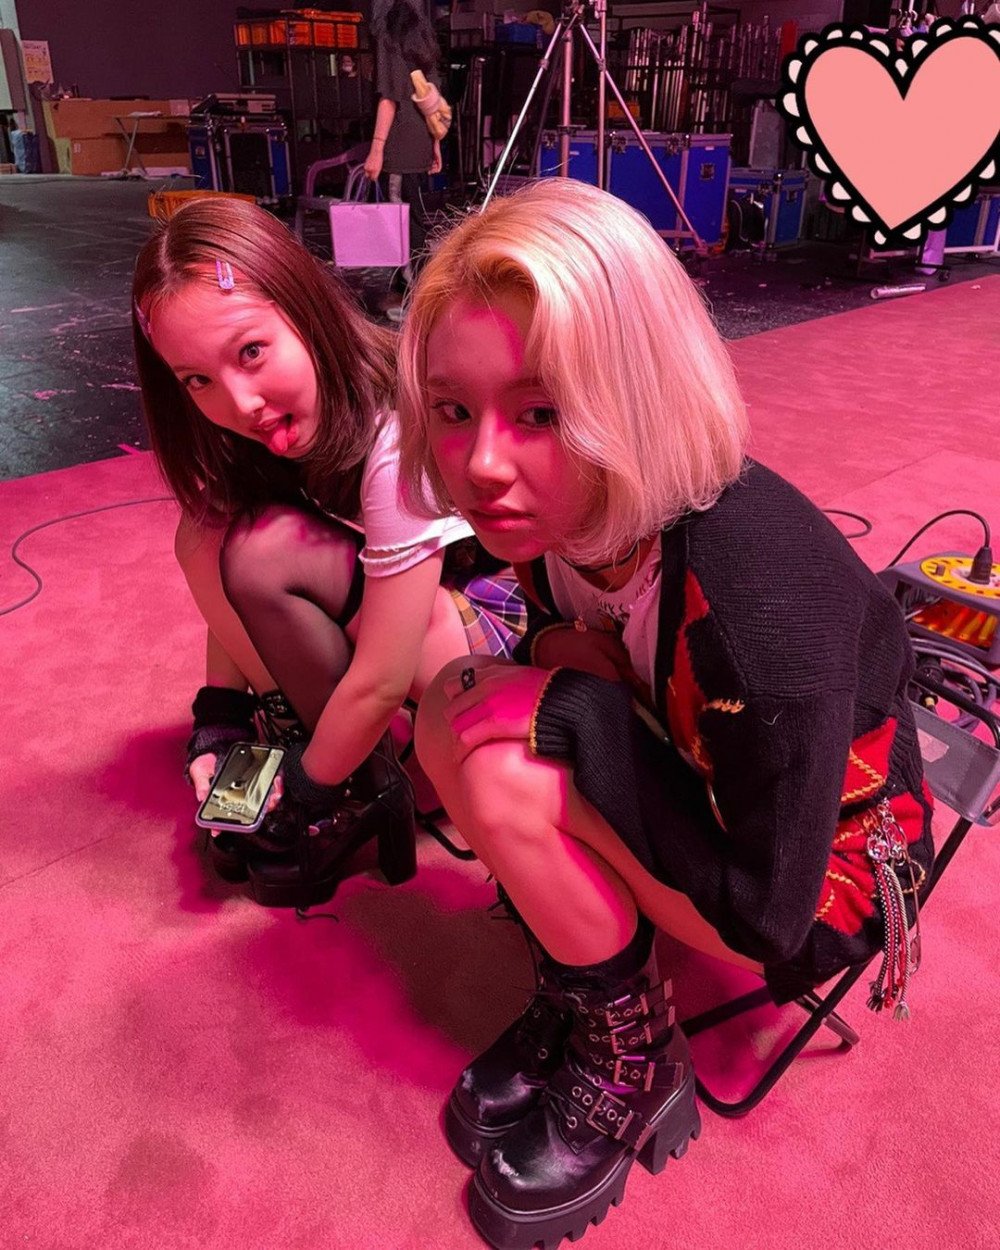 TWICE's Nayeon and Chaeyoung the latest Instagram update